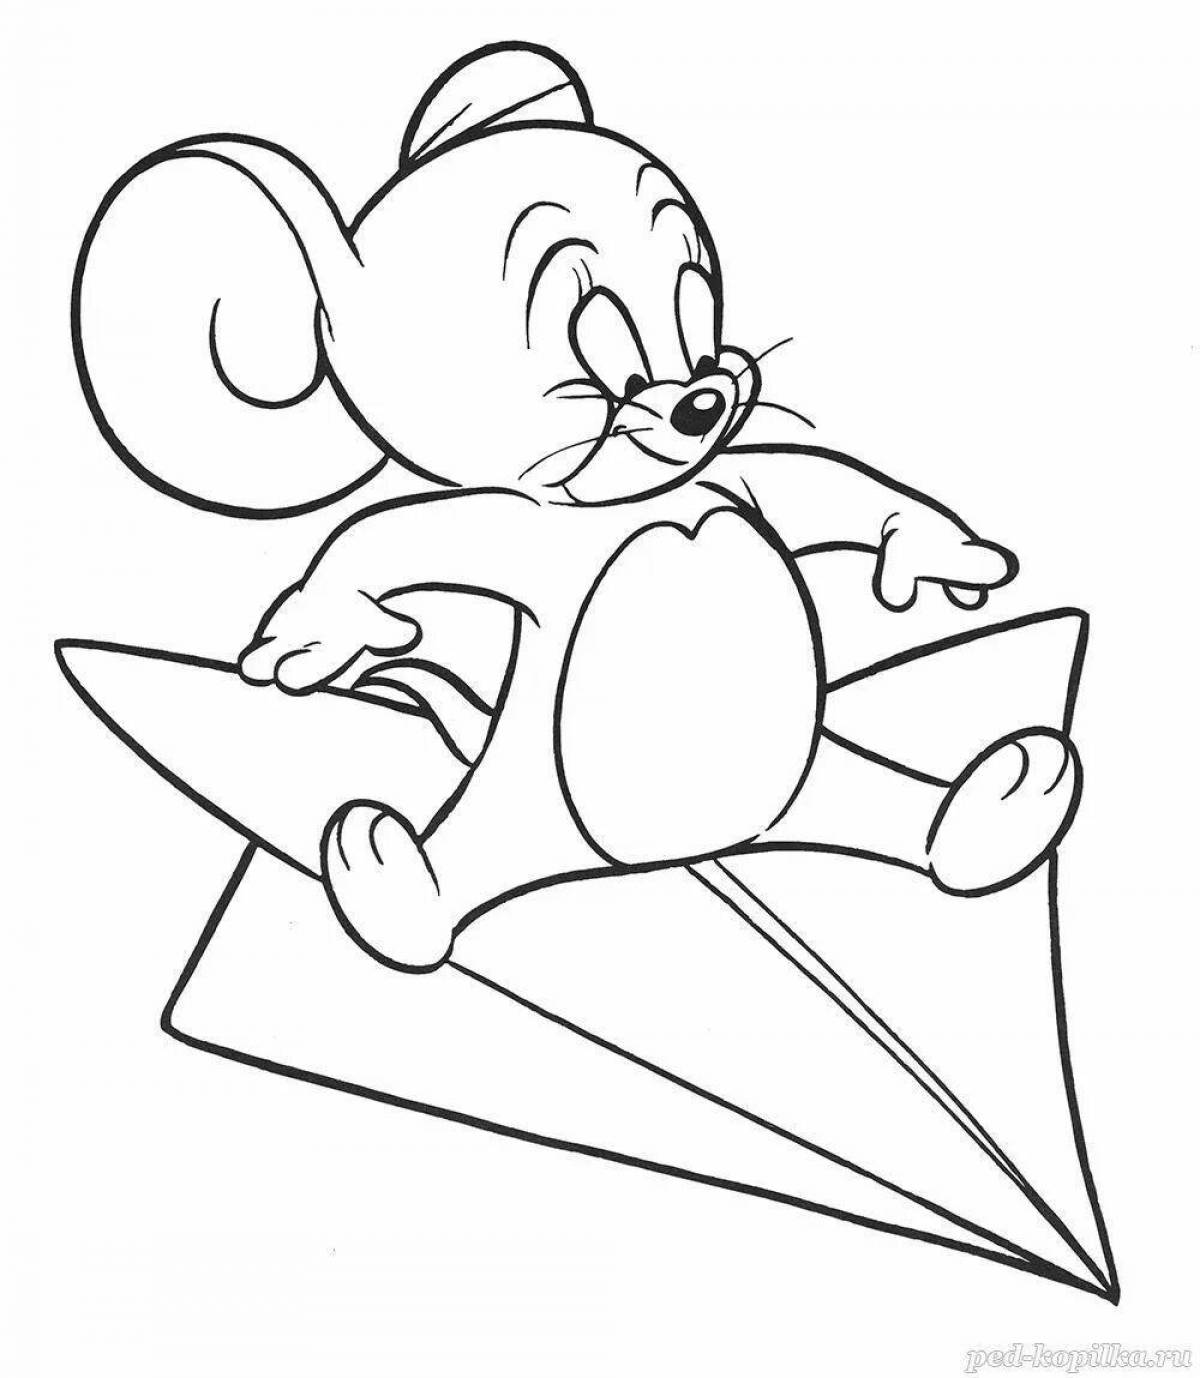 Colour-loving mouse-coloring book for children 3-4 years old